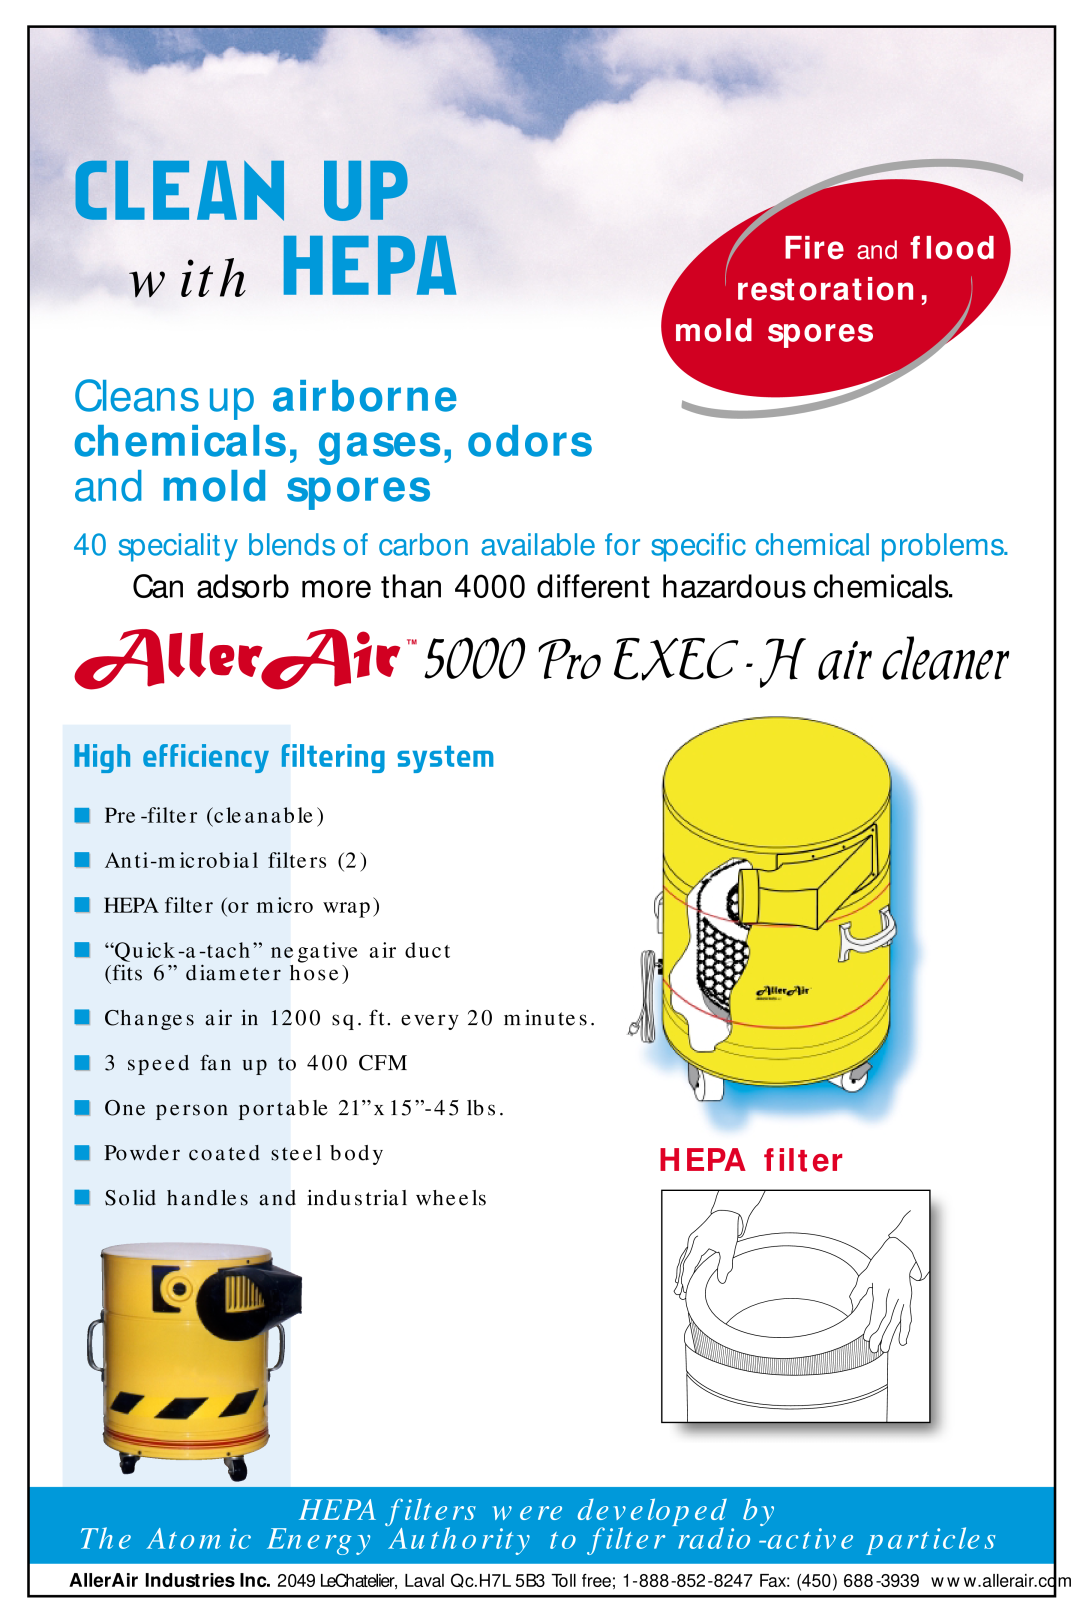 AllerAir 500 Pro Exec H manual Clean Up, Pro EXEC - H air cleaner, with HEPA, Fire and flood restoration mold spores 